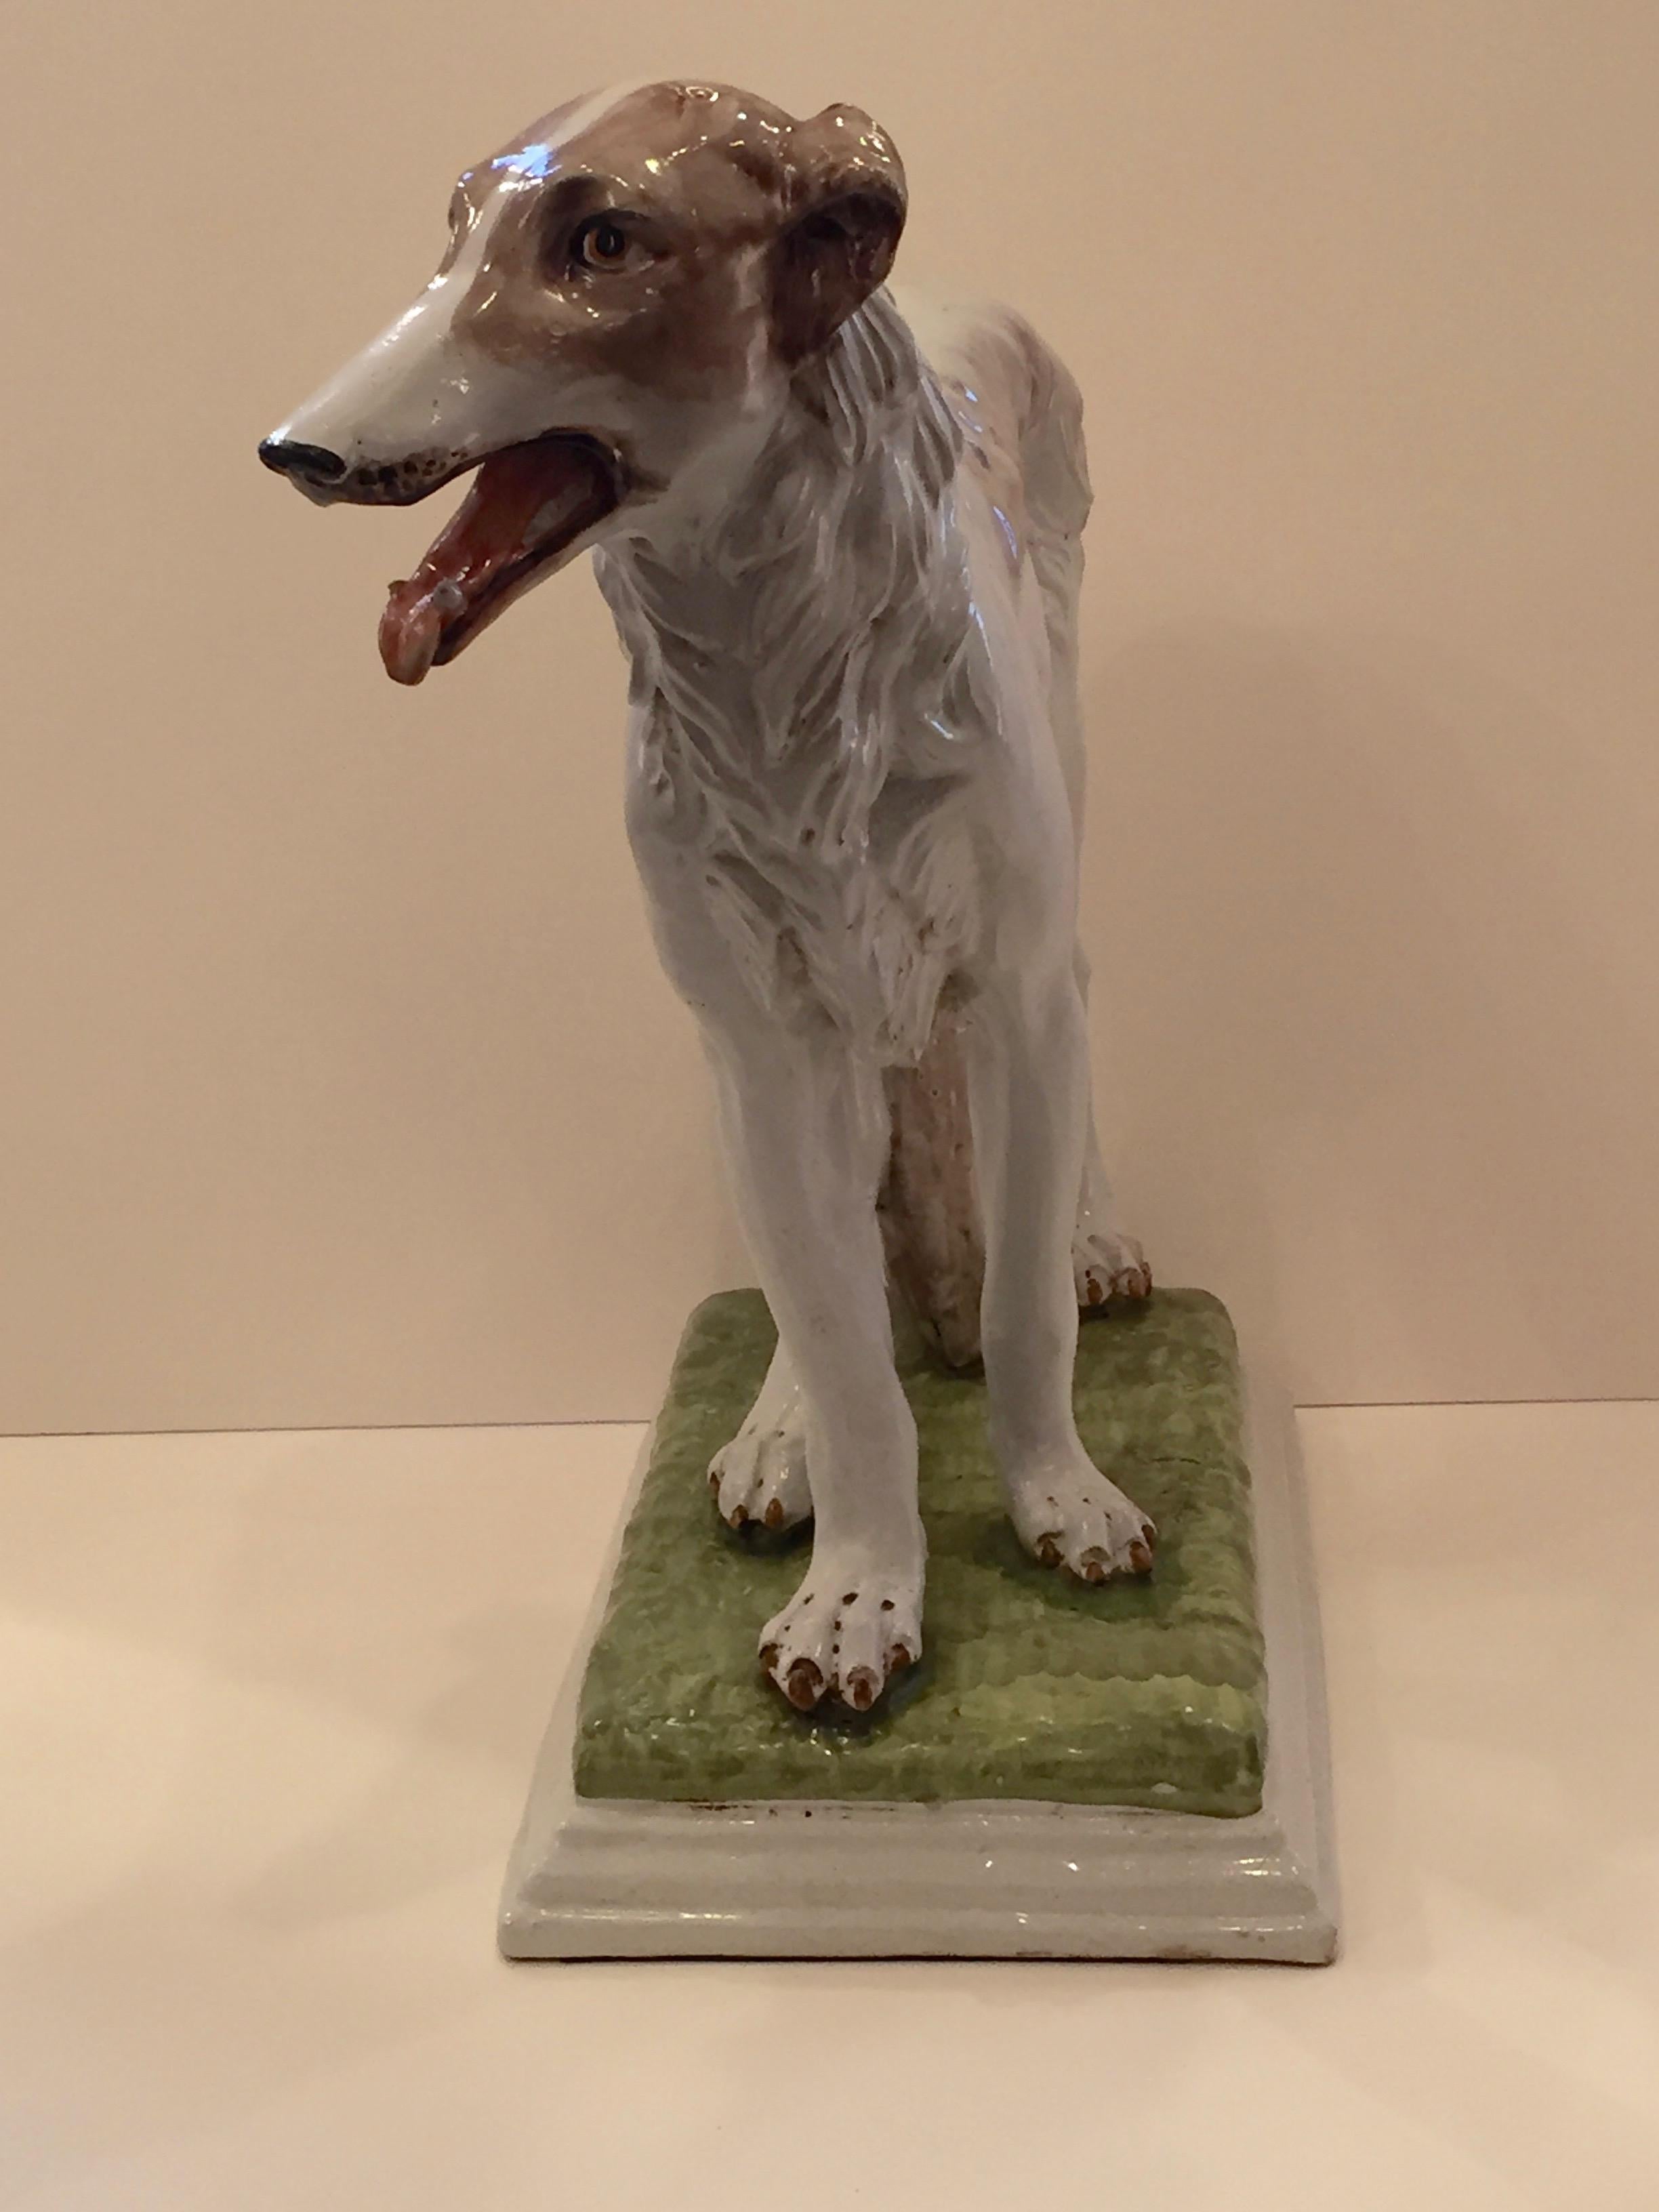 Wonderful glazed terracotta sculpture of a Russian Wolfhound with an impressive scale.